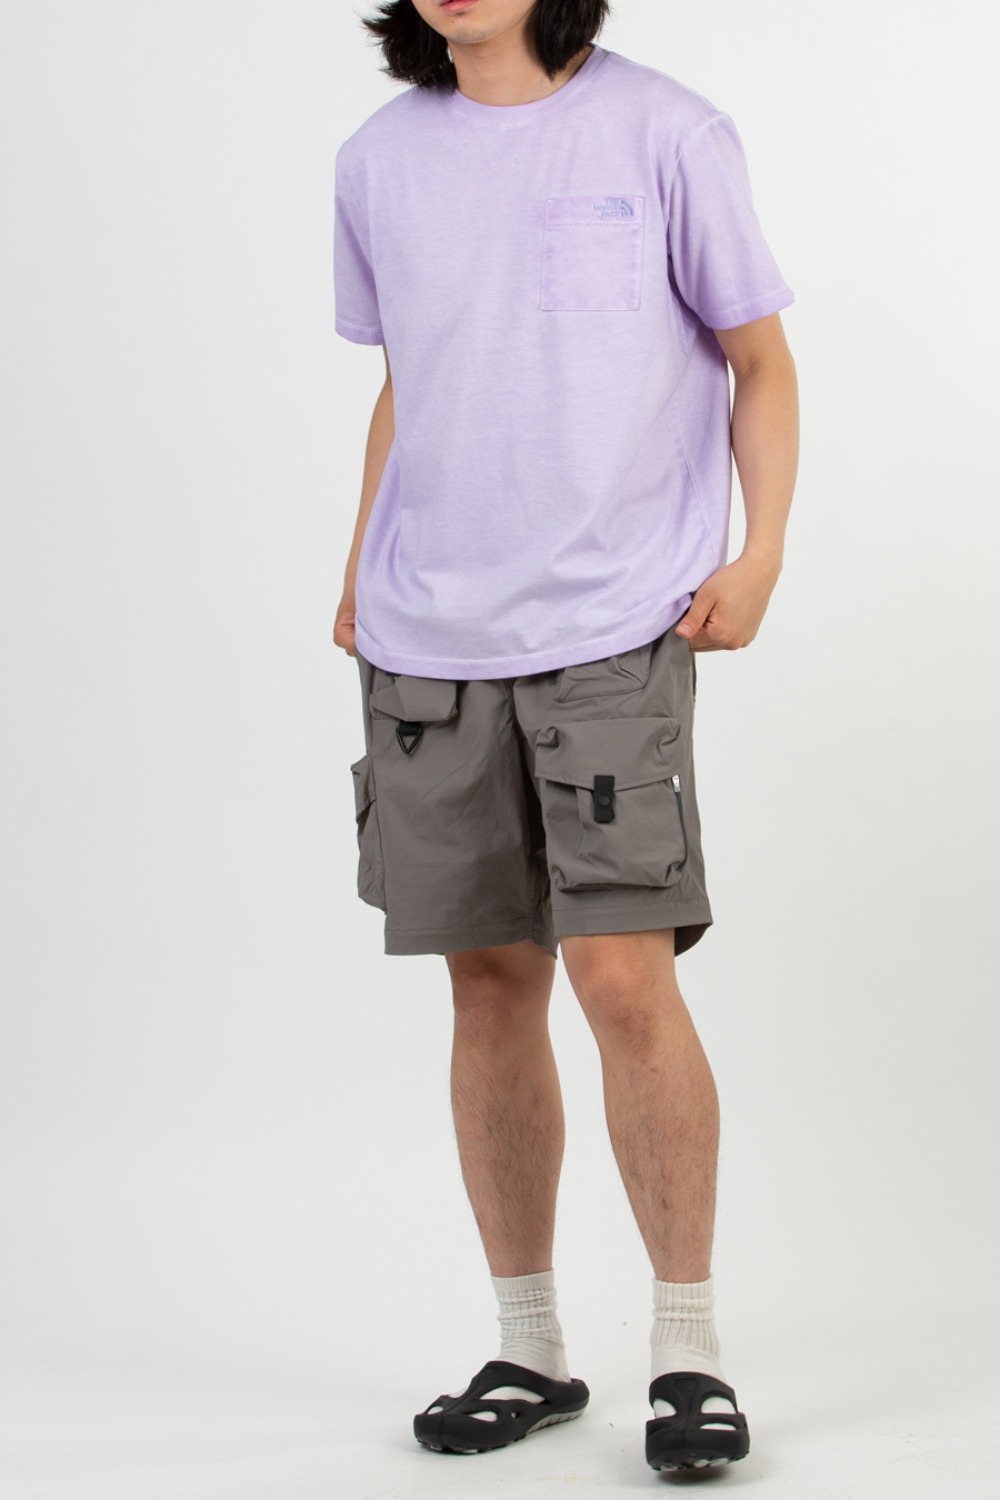 NOVELTY BRYCE S/S R/TEE LAVENDER